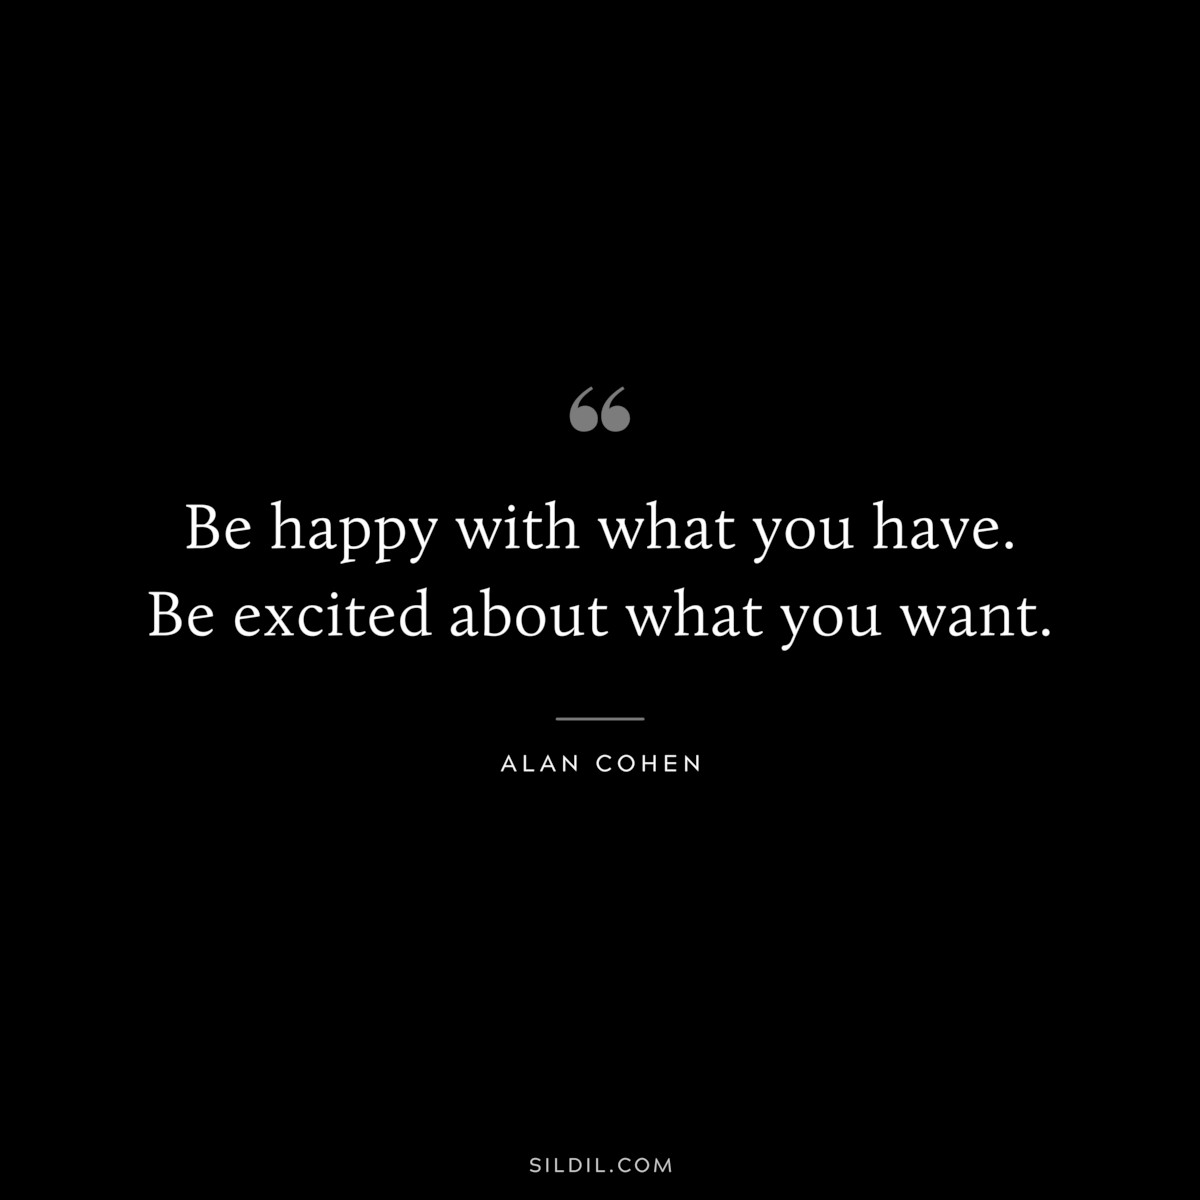 Be happy with what you have. Be excited about what you want. ― Alan Cohen